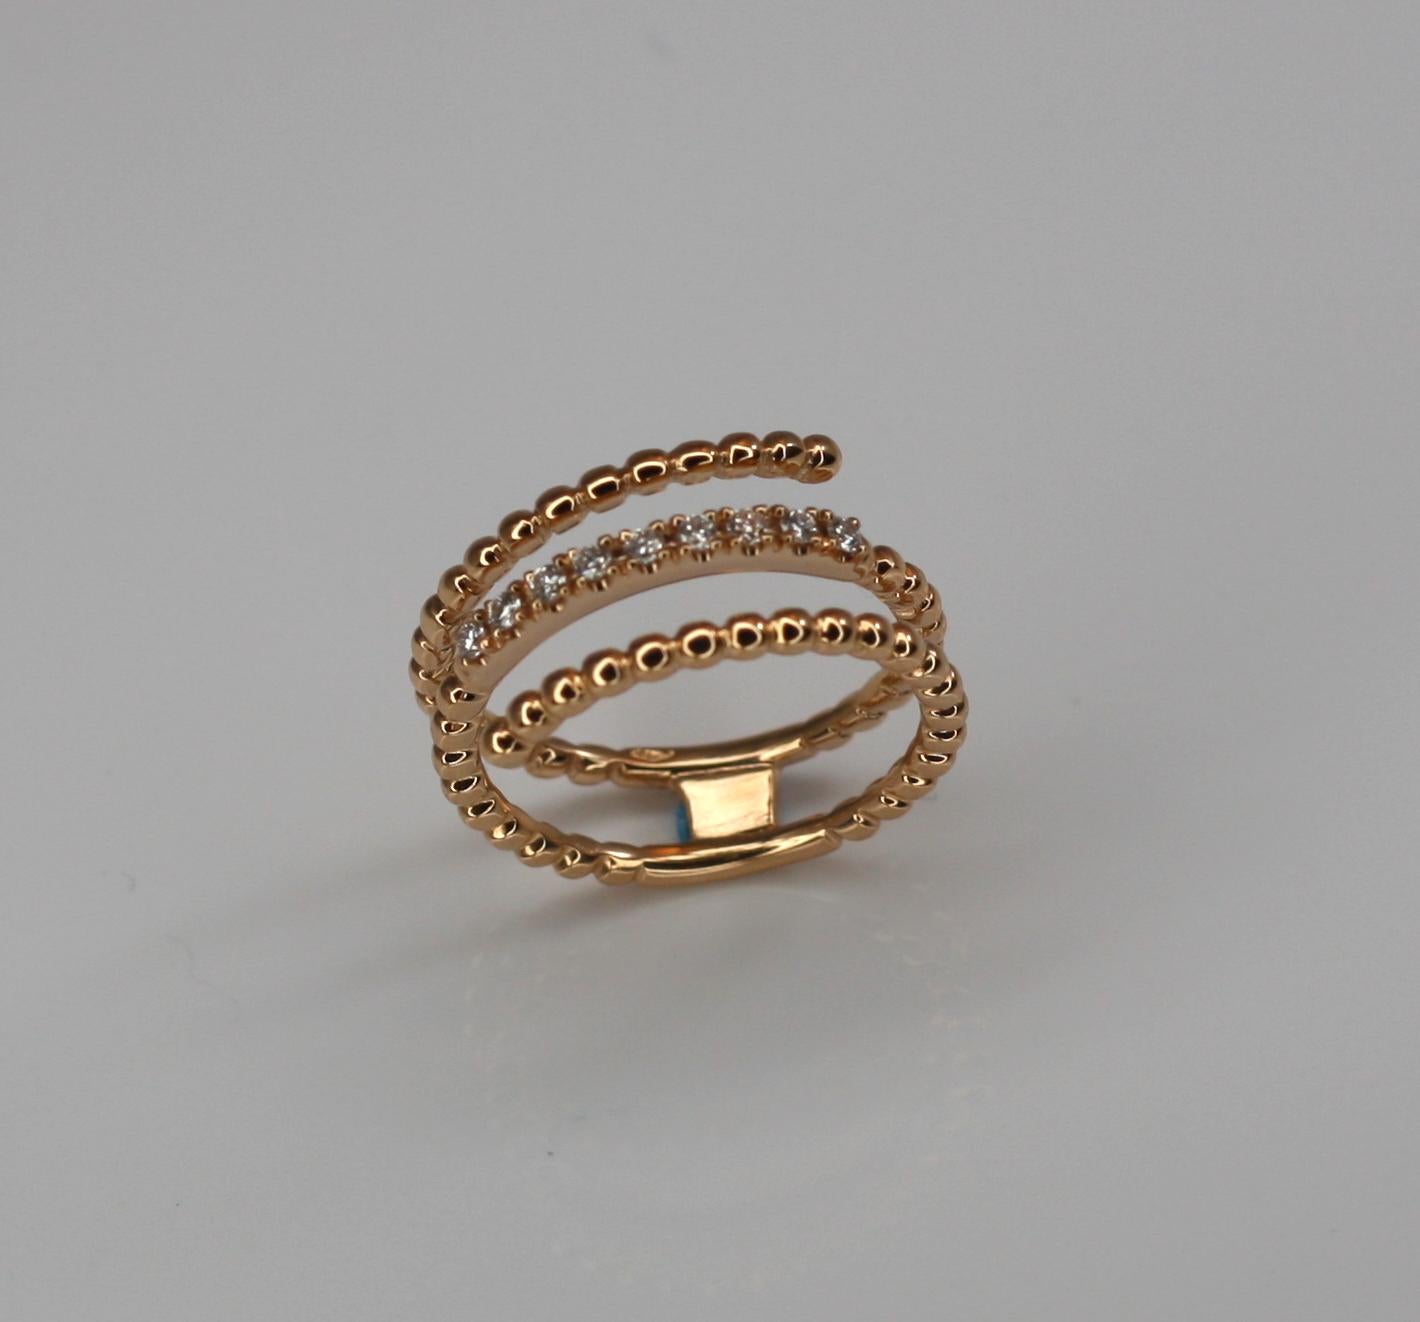 S.Georgios designer 18 Karat Rose Gold Band Ring all hand made. This beautiful and simple to wear triple-band ring has a layer of white brilliant cut diamonds on the middle layer total weight of 0.15 Carat and can be ordered also in Yellow and White